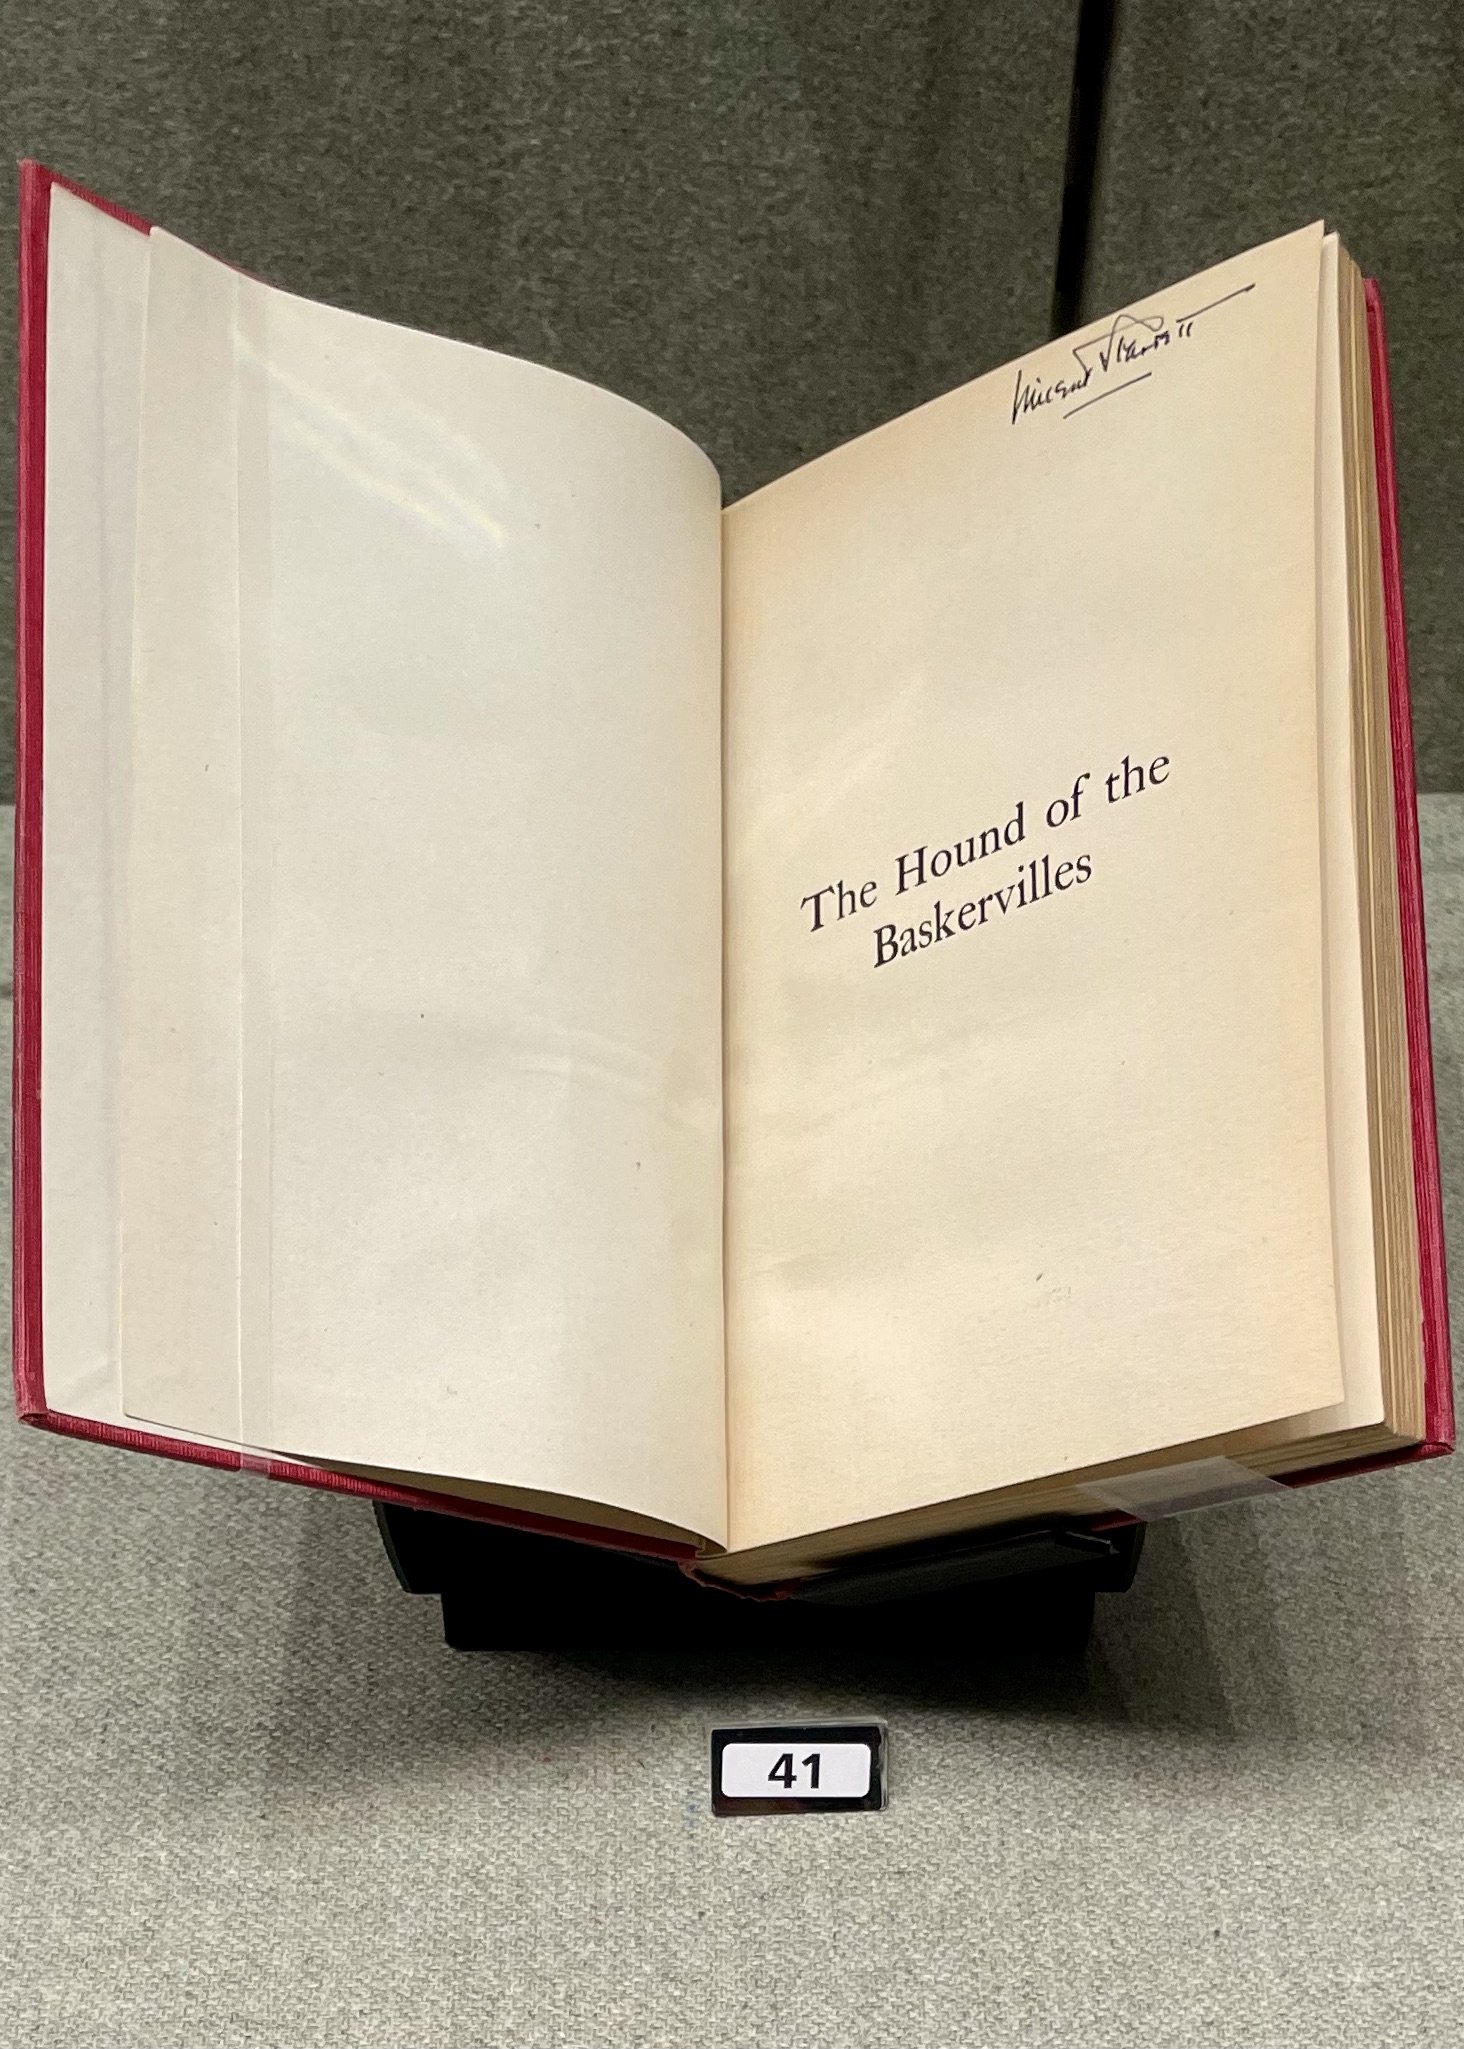  Vincent Starrett’s first edition copy of The Hound of the Baskervilles.  